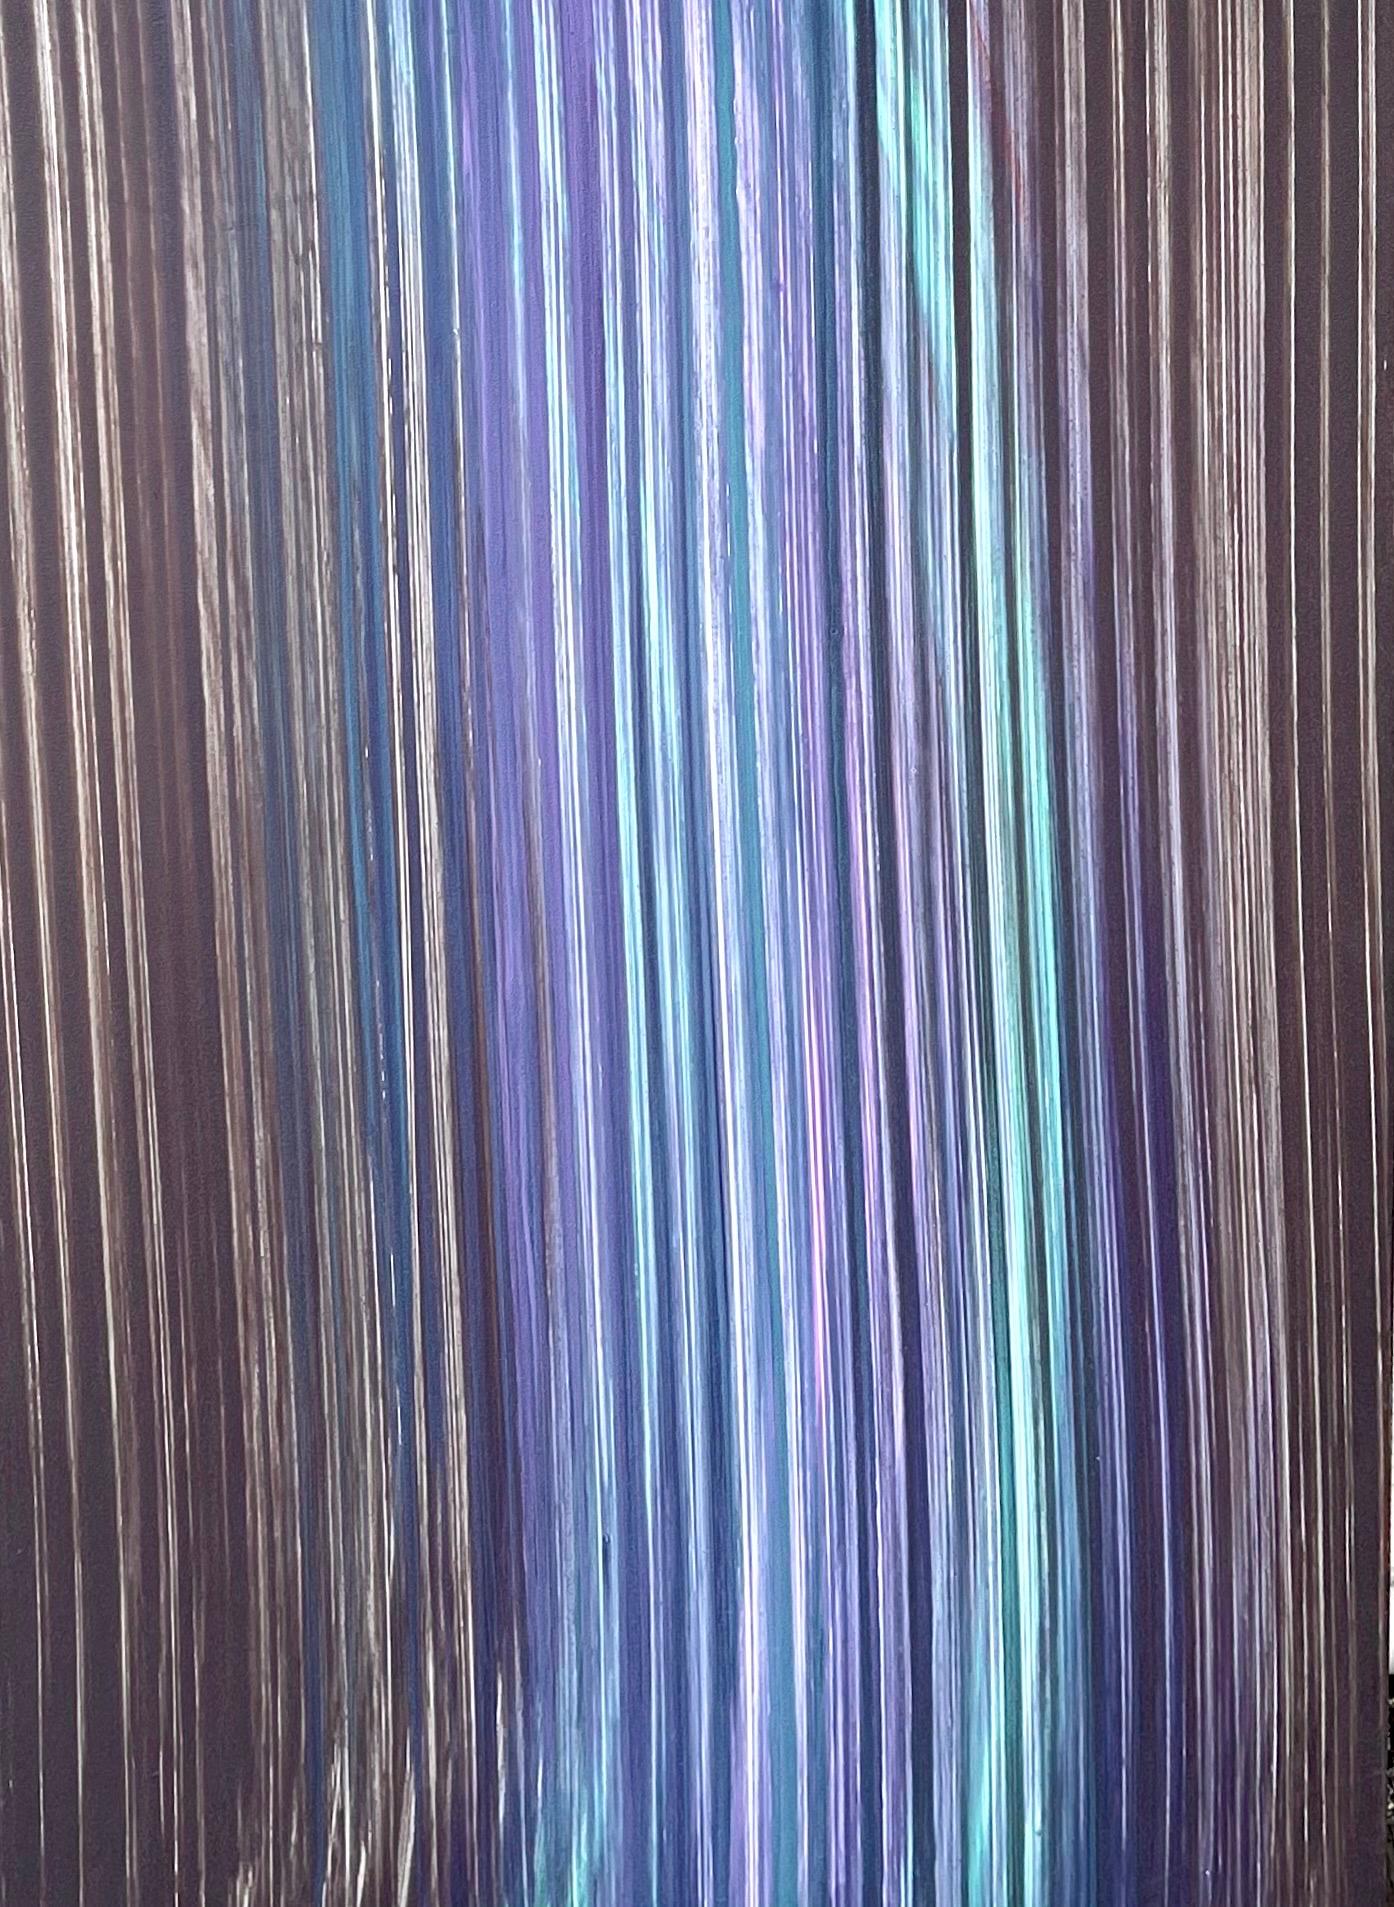 Gina Medcalf (British, 1941-)
"Shallow Ground 2", 2008 
(Shallow Brown)
Acrylic on canvas
Hand signed, dated and titled reverse. 
27 X 18
this painting is not framed
Polychrome abstract featuring undulating vertical lines in an ombre color rainbow